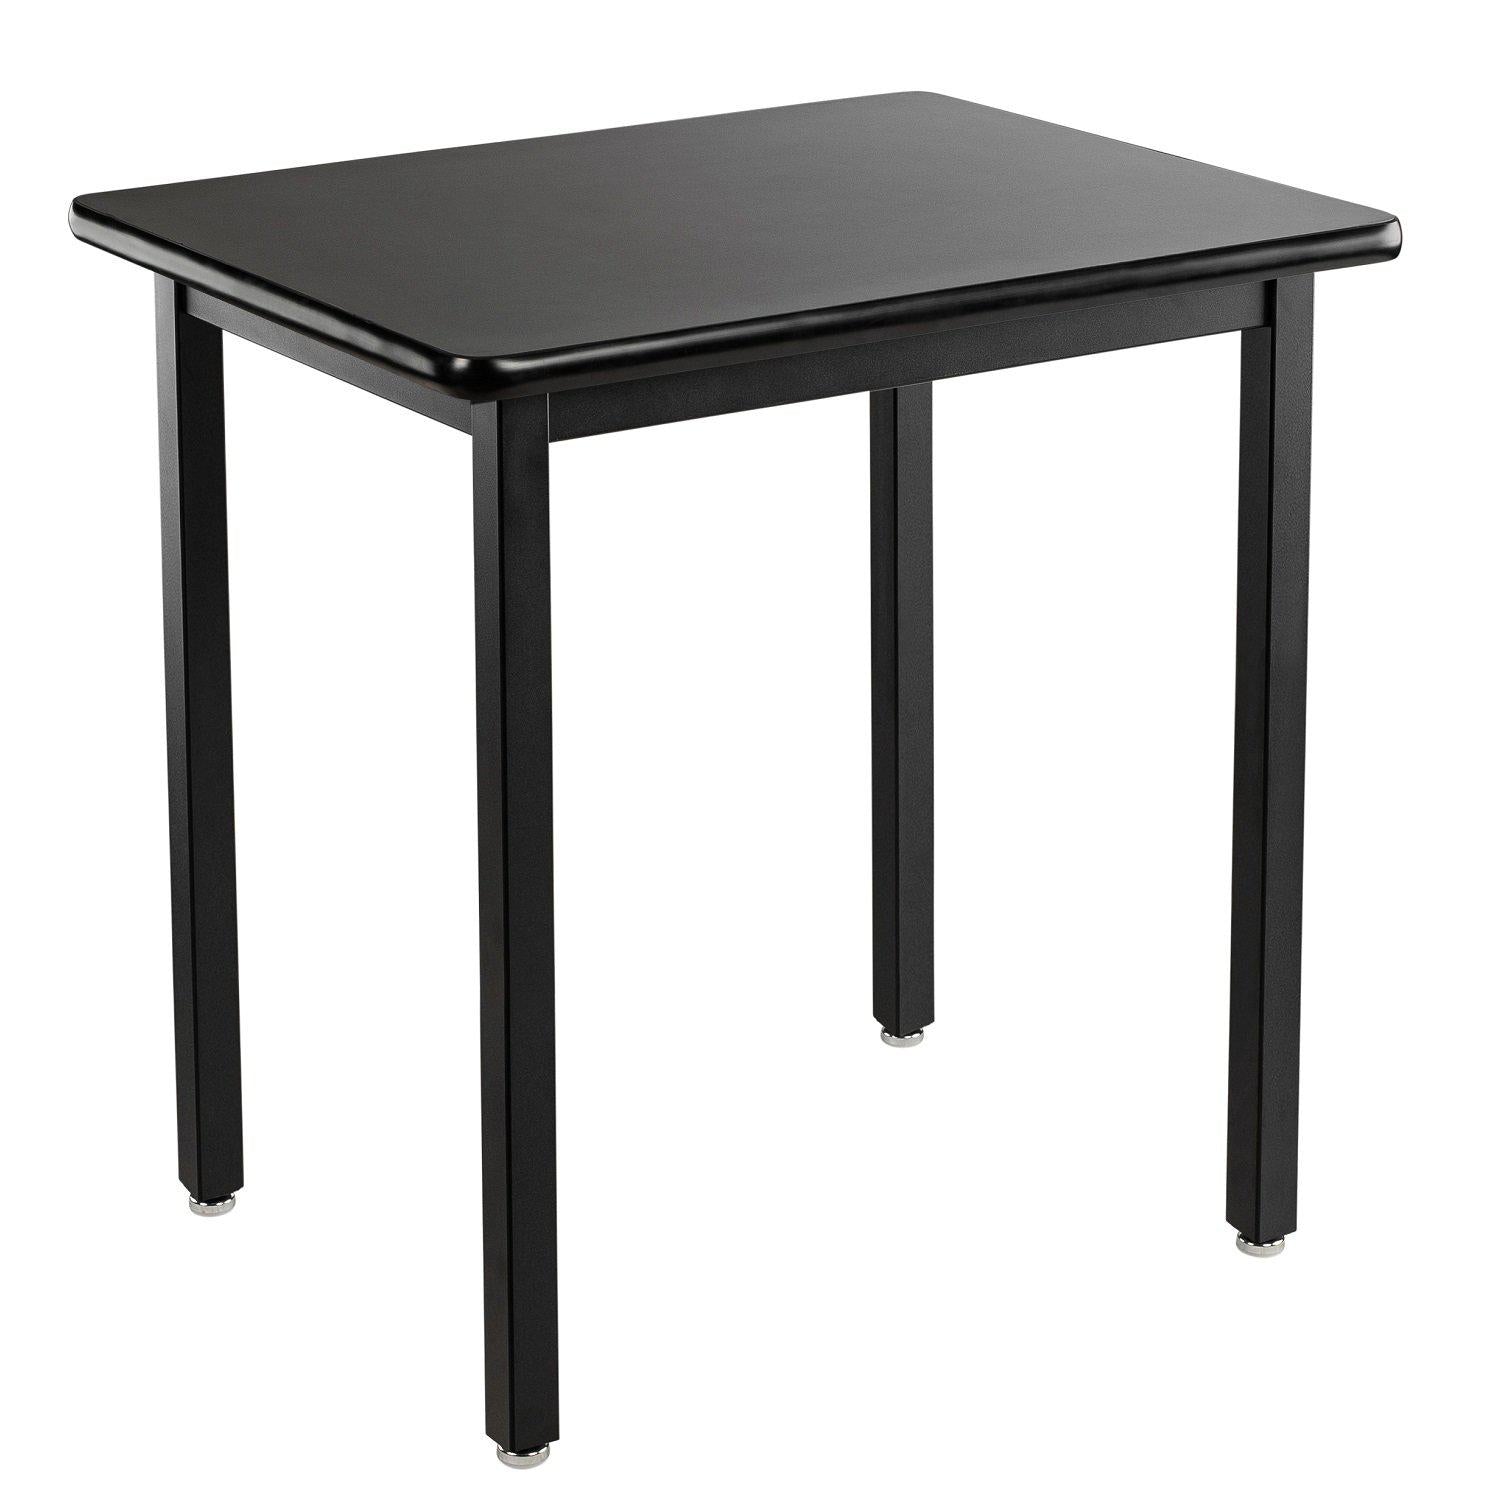 Heavy-Duty Fixed Height Utility Table, Black Frame, 24" x 24", High-Pressure Laminate Top with T-Mold Edge